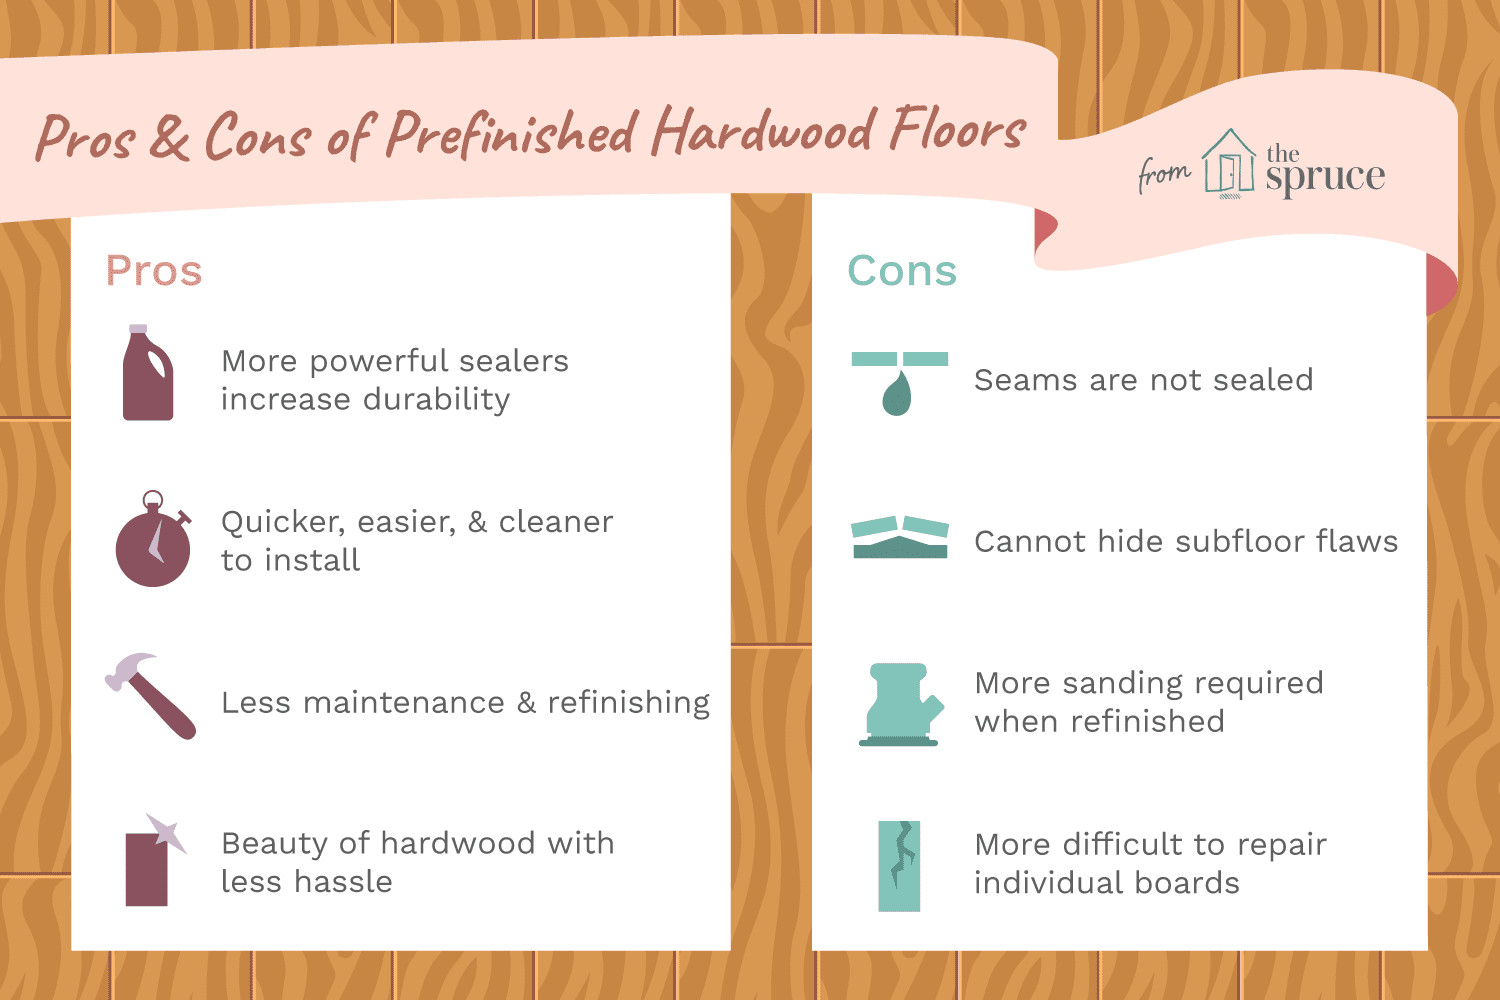 weeks hardwood flooring reviews of the pros and cons of prefinished hardwood flooring intended for prefinished hardwood floors